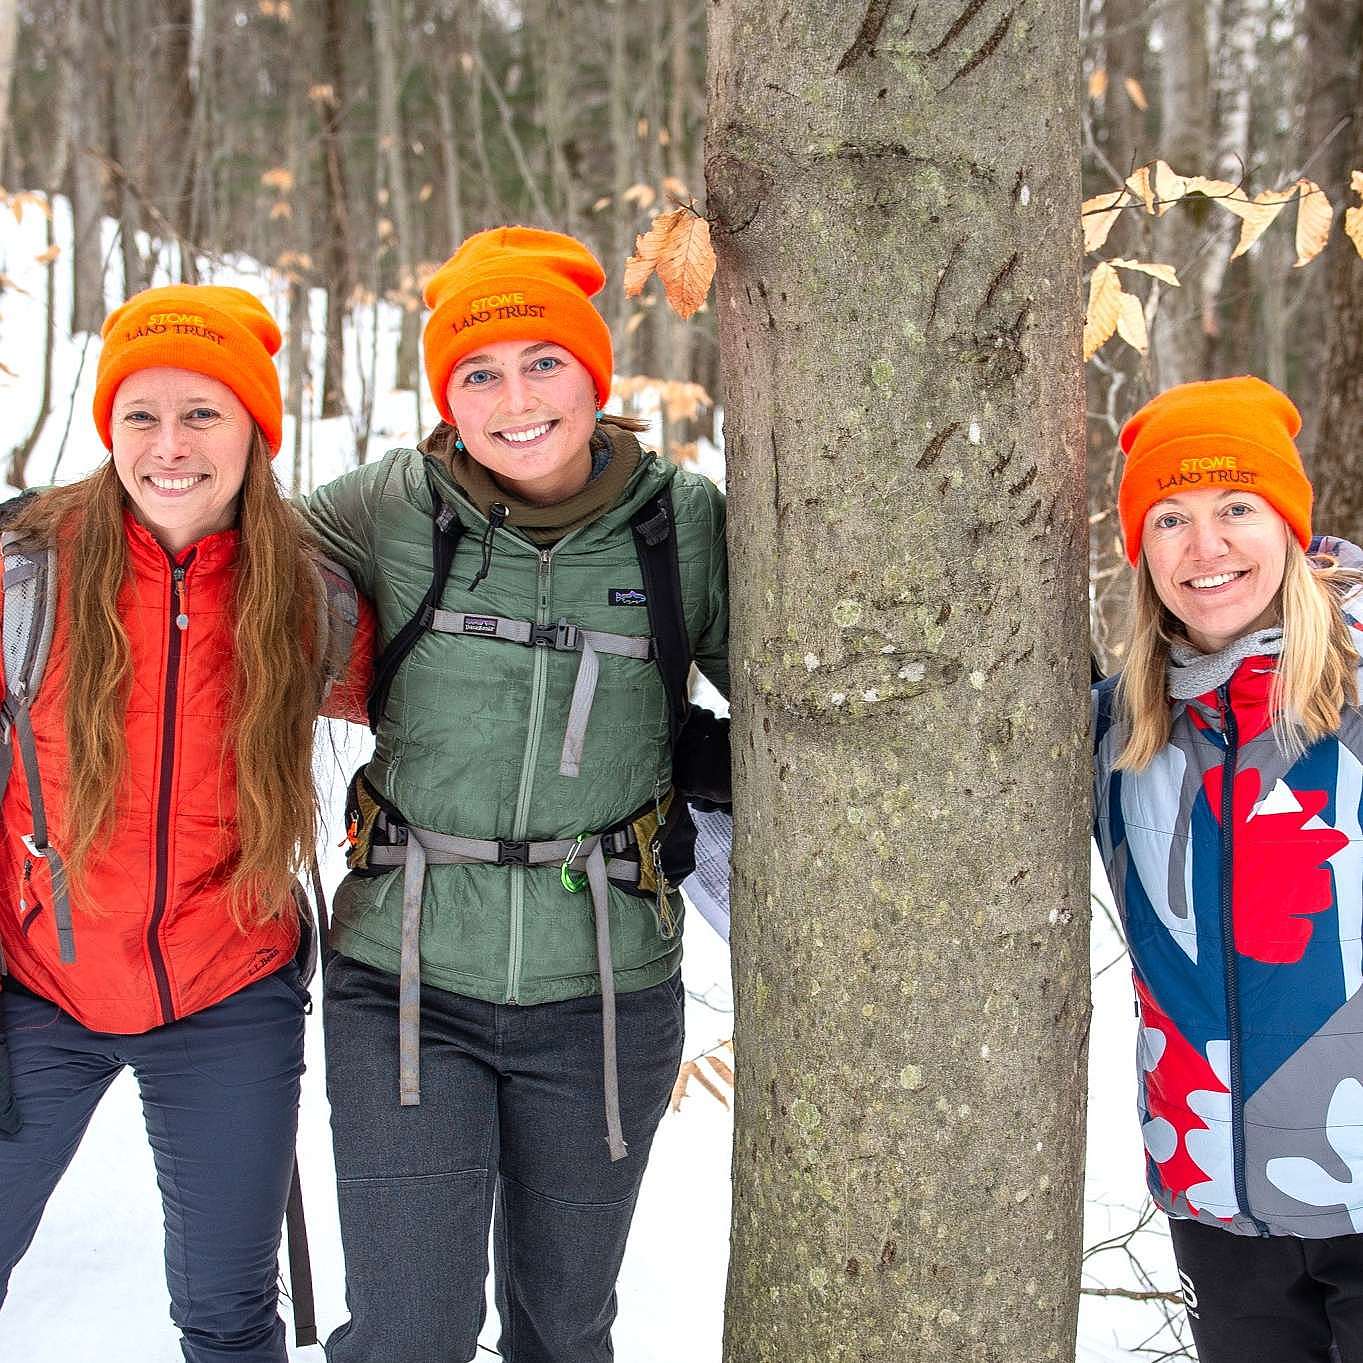 Three members of the Stowe Land Trust team, all wearing blaze orange beanies, smile next to a bear-scarred beech tree.